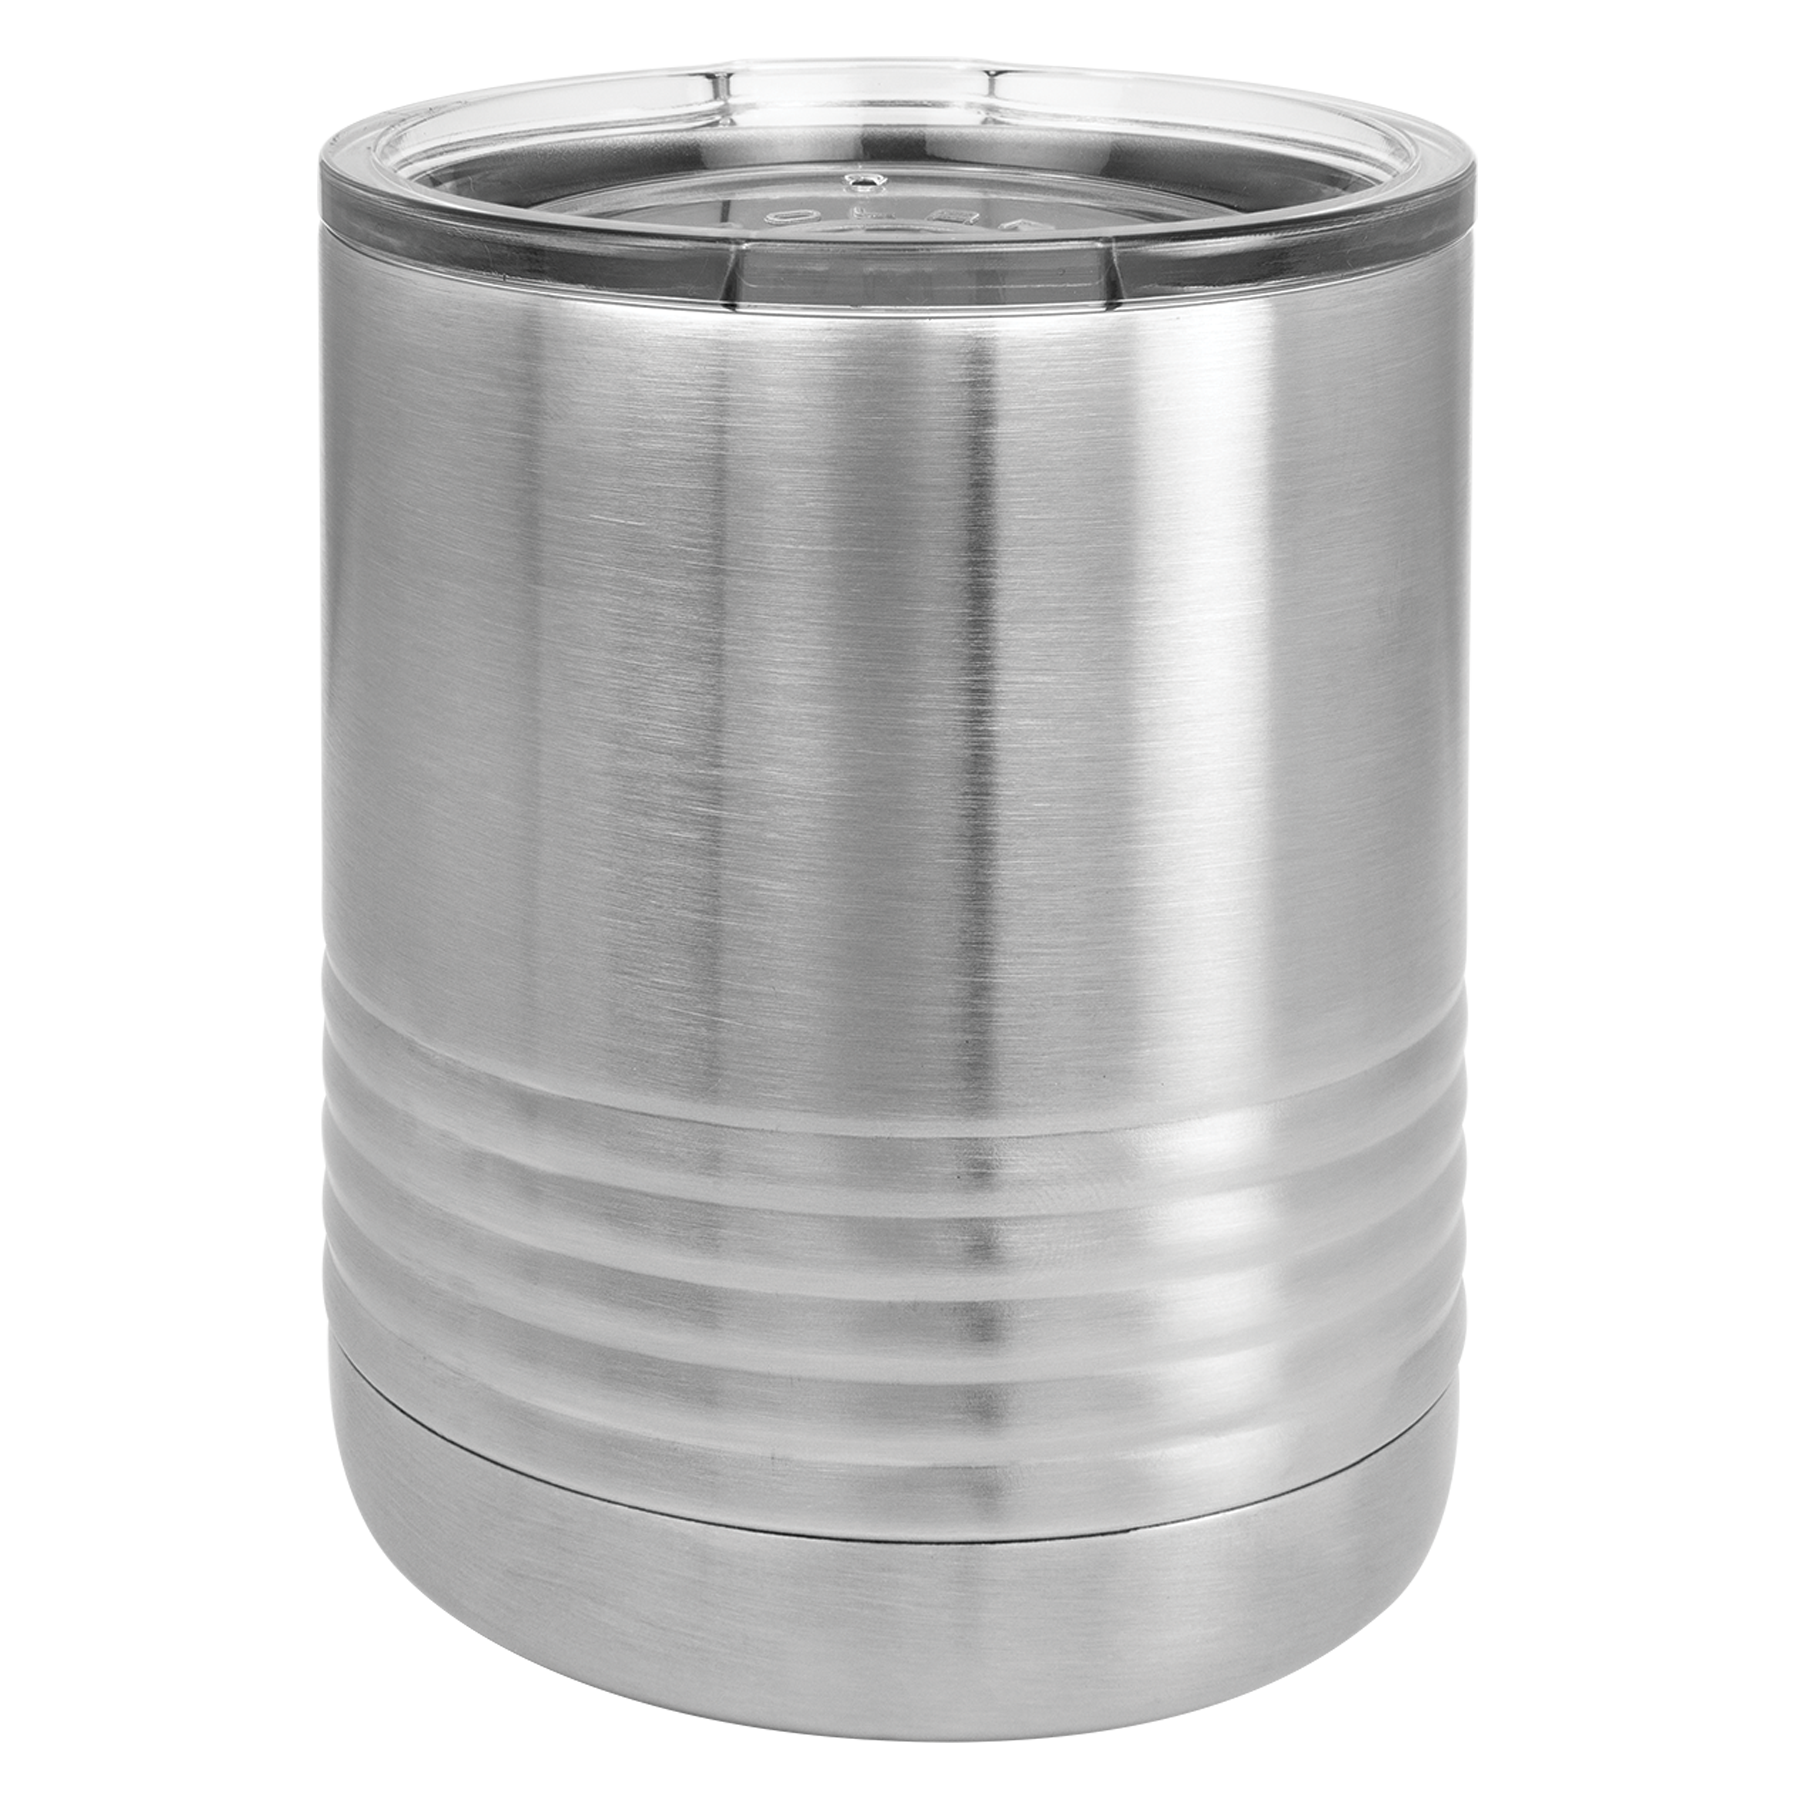 Engraved Stainless Steel 10 oz. Lowball Tumbler. Double-wall vacuum insulation with a clear lid. It is 2X heat & cold resistant. Is lead free. Polar Camels are made from 18/8 gauge stainless steel (18% chromium/8% nickel) - also known as Type 304 Food Grade. 